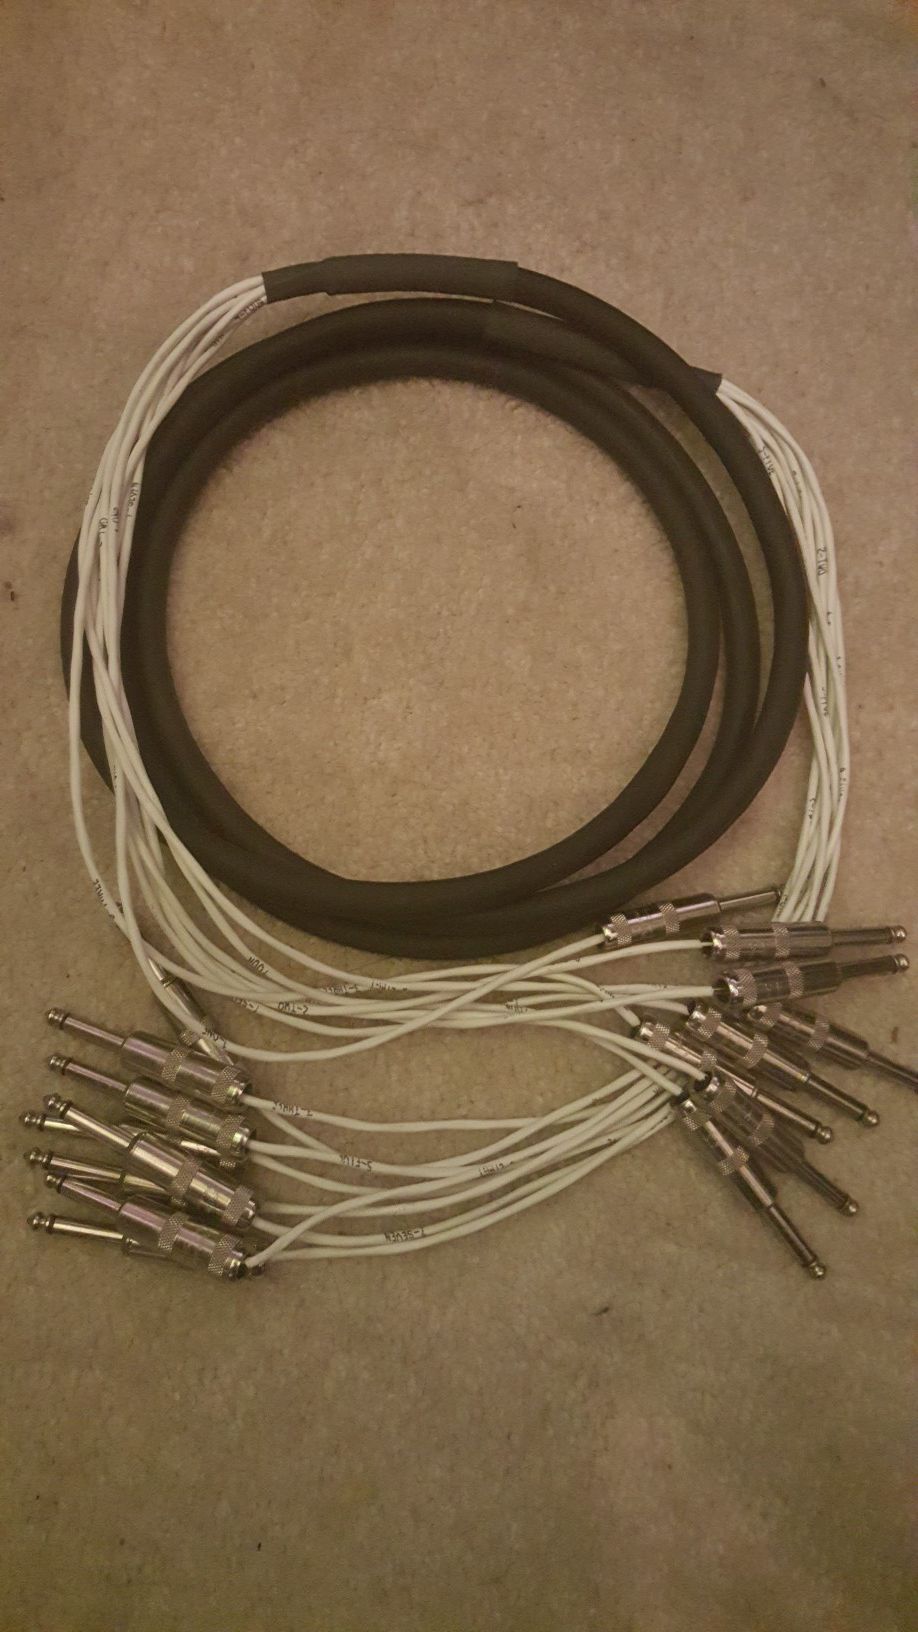 10 foot, 8 channel, 1/4 cable snake TS male to male.